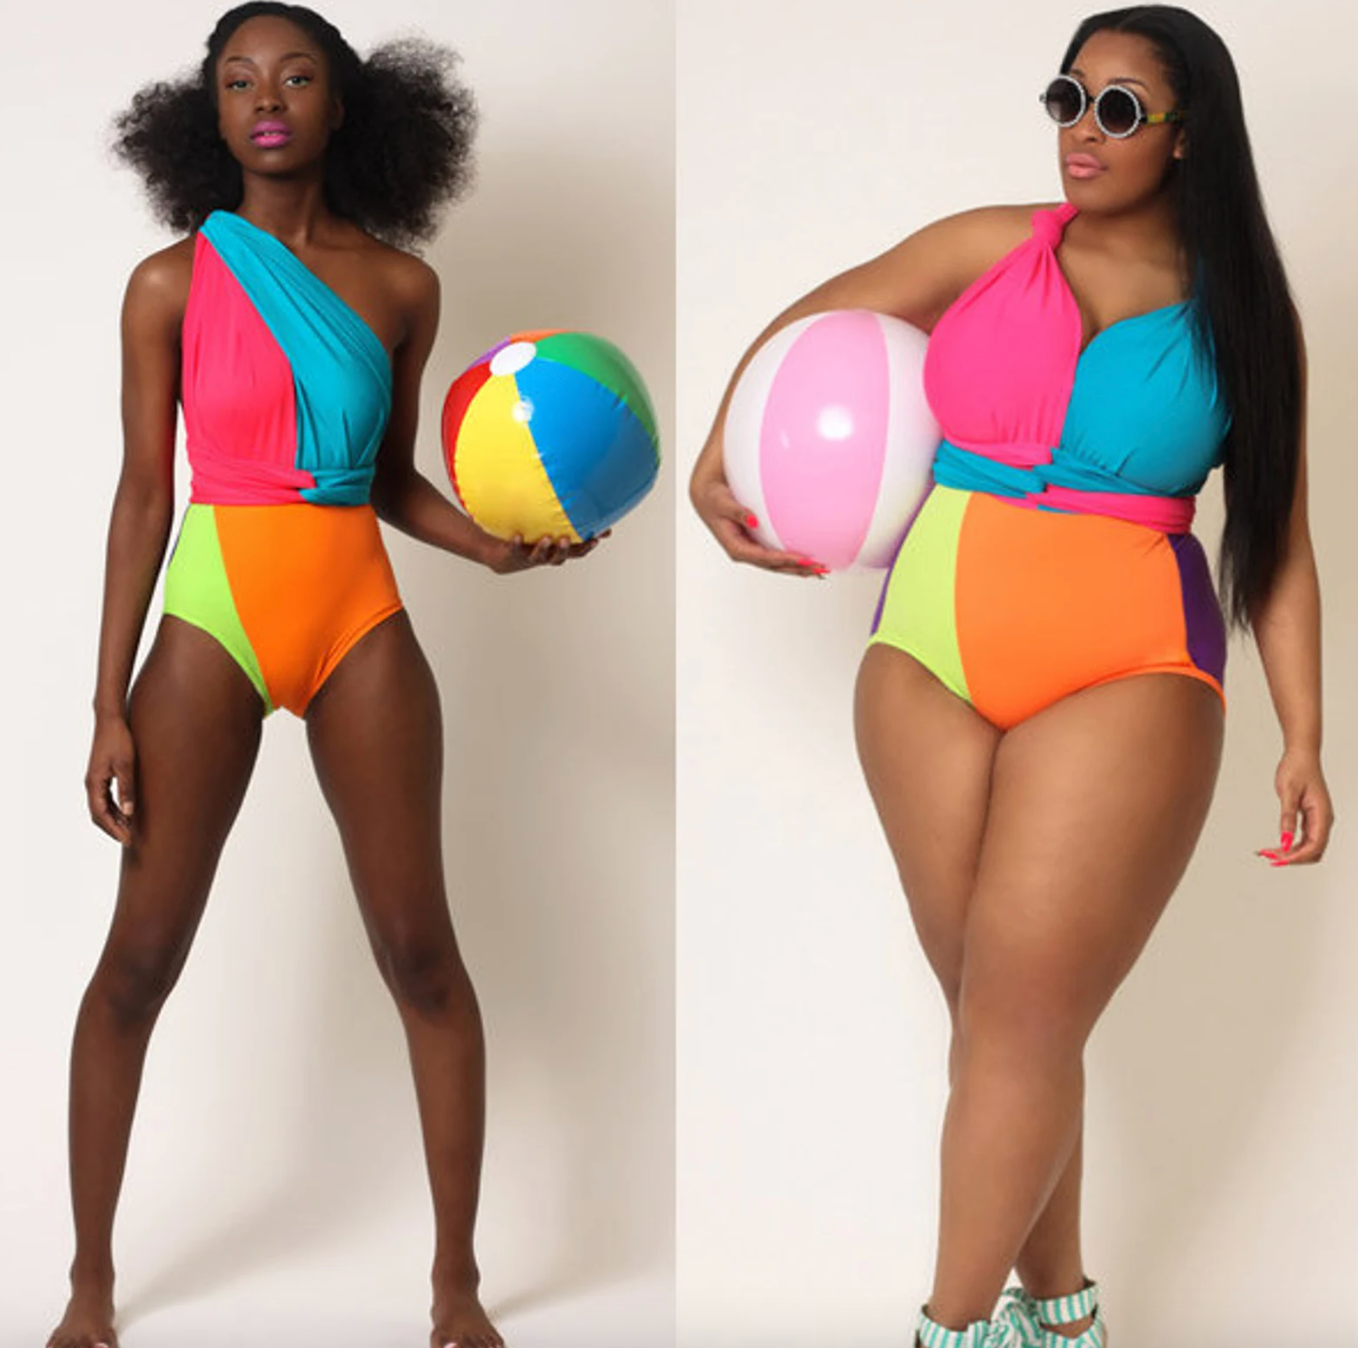 model wearing the swimsuit in two different ways